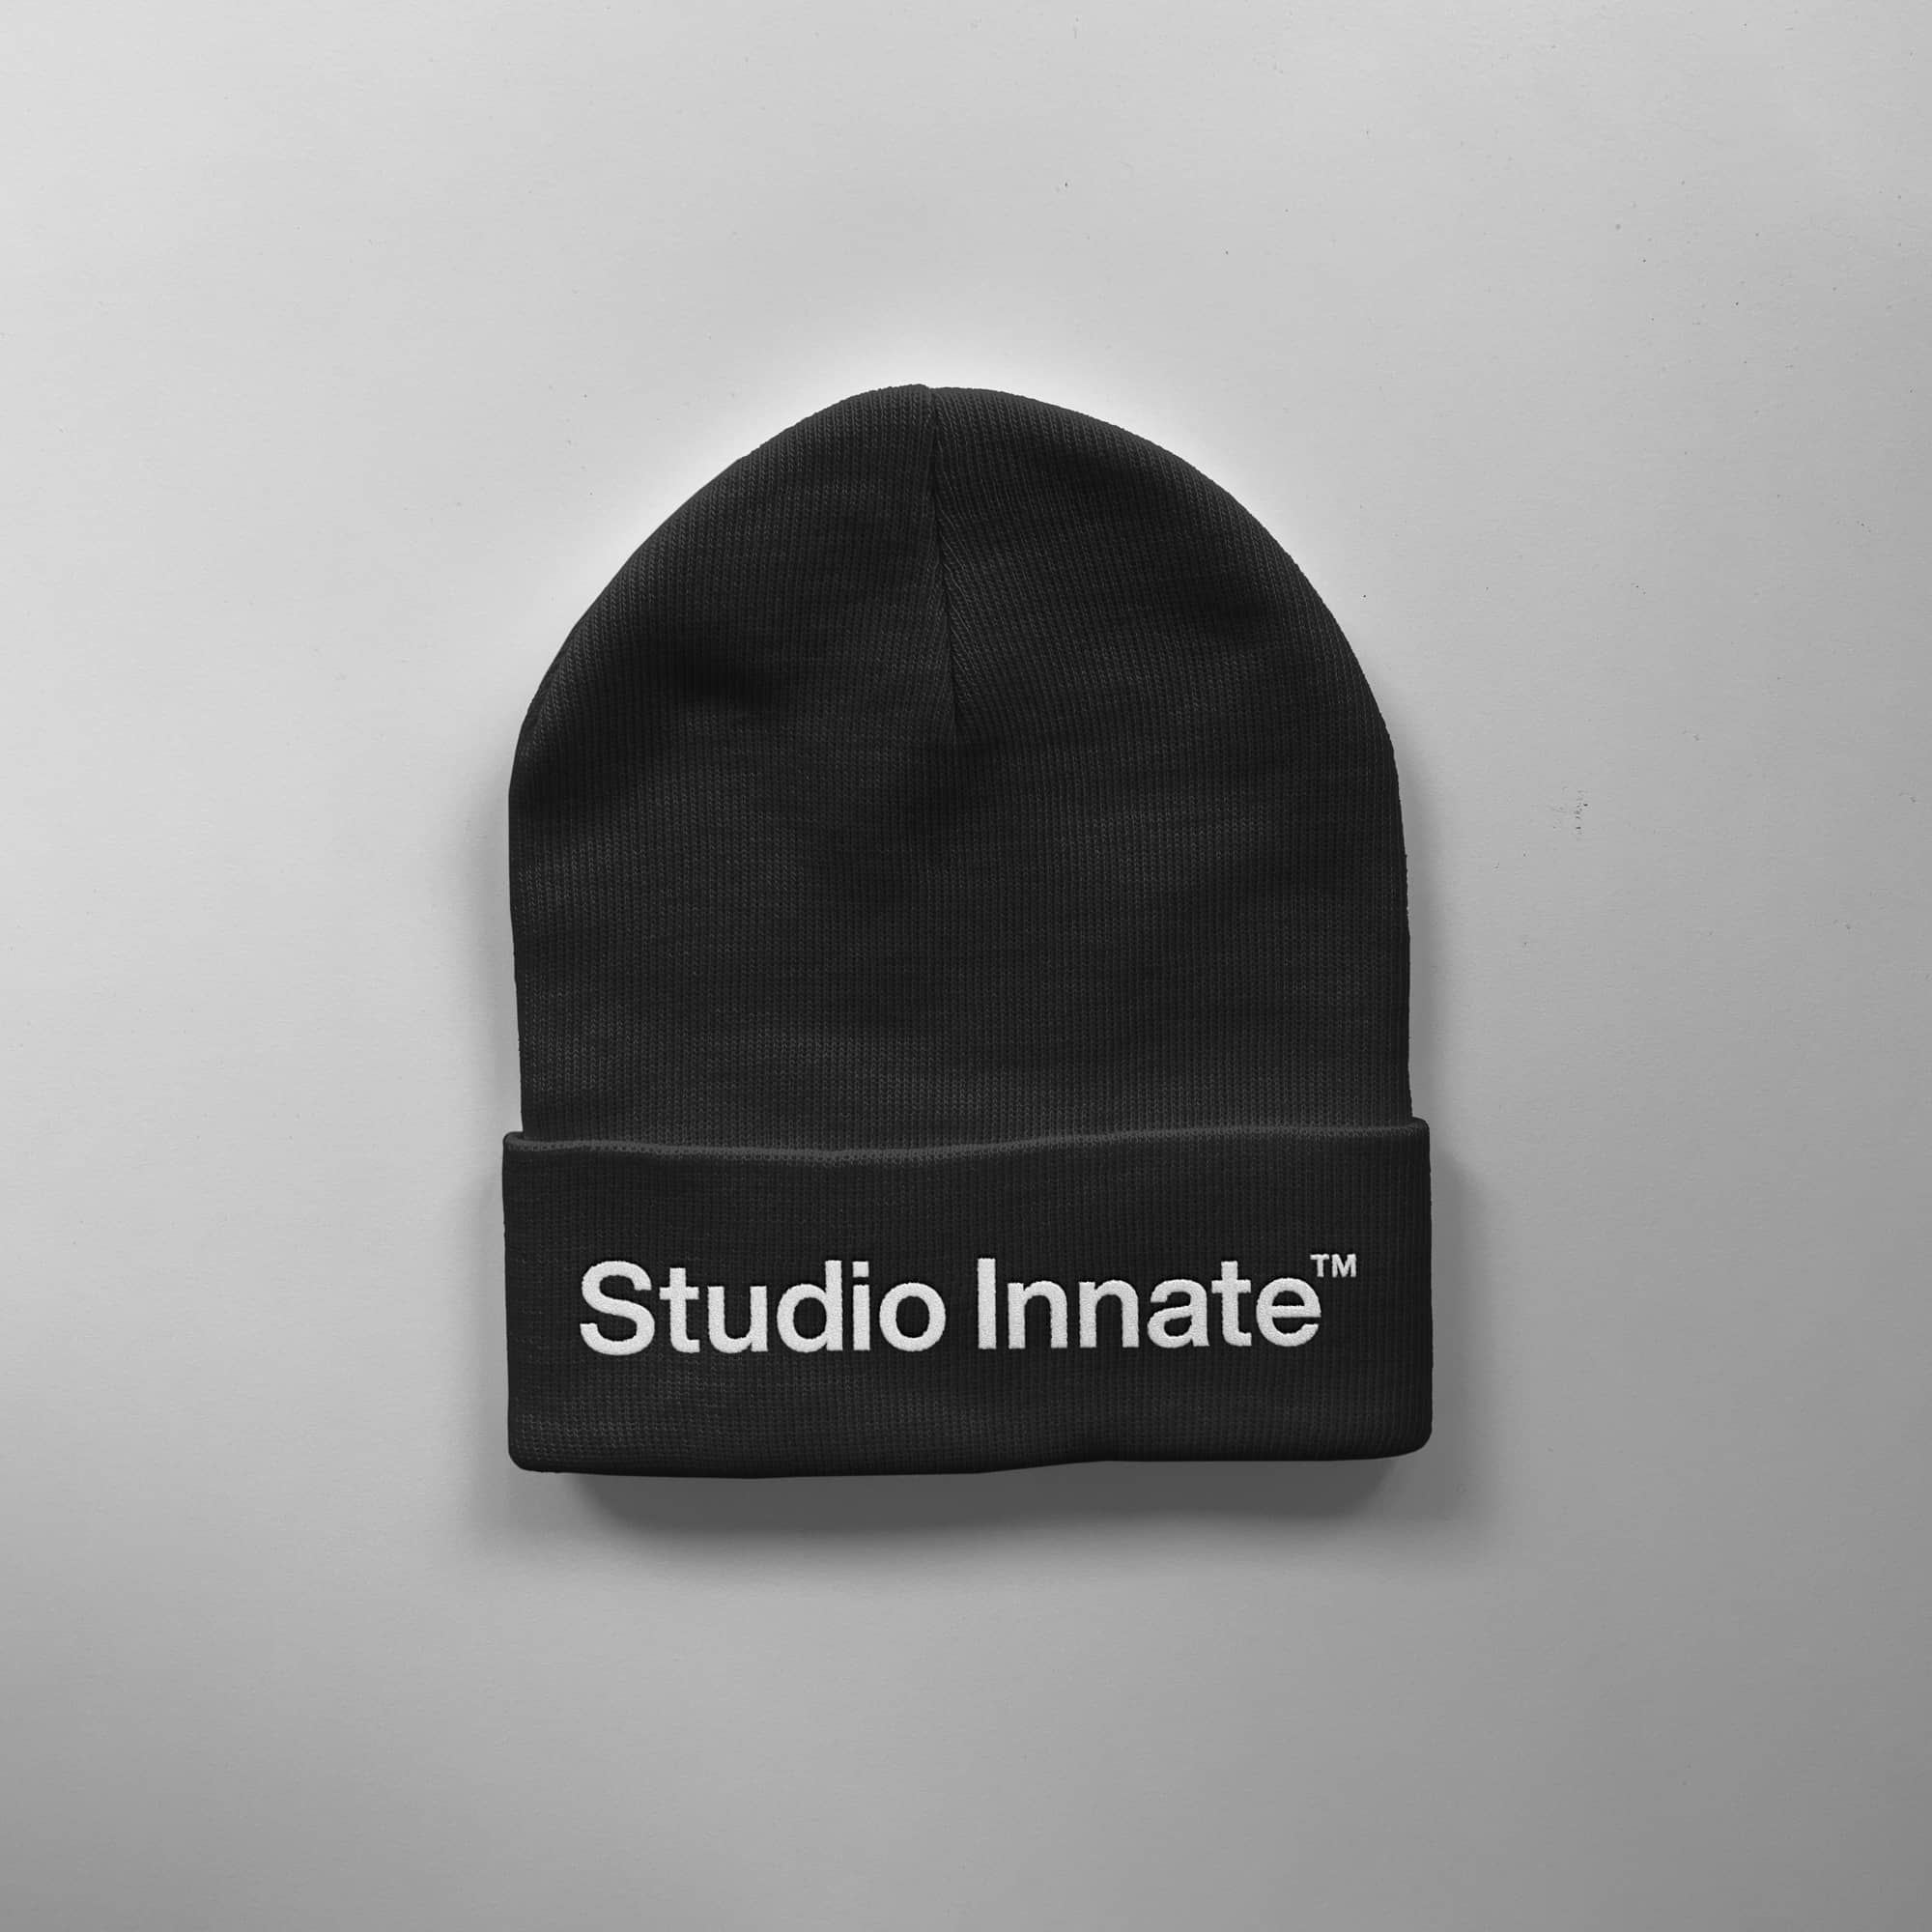 Download Beanie Mockup Photoshop Mockups Textures And Fonts Studio Innate